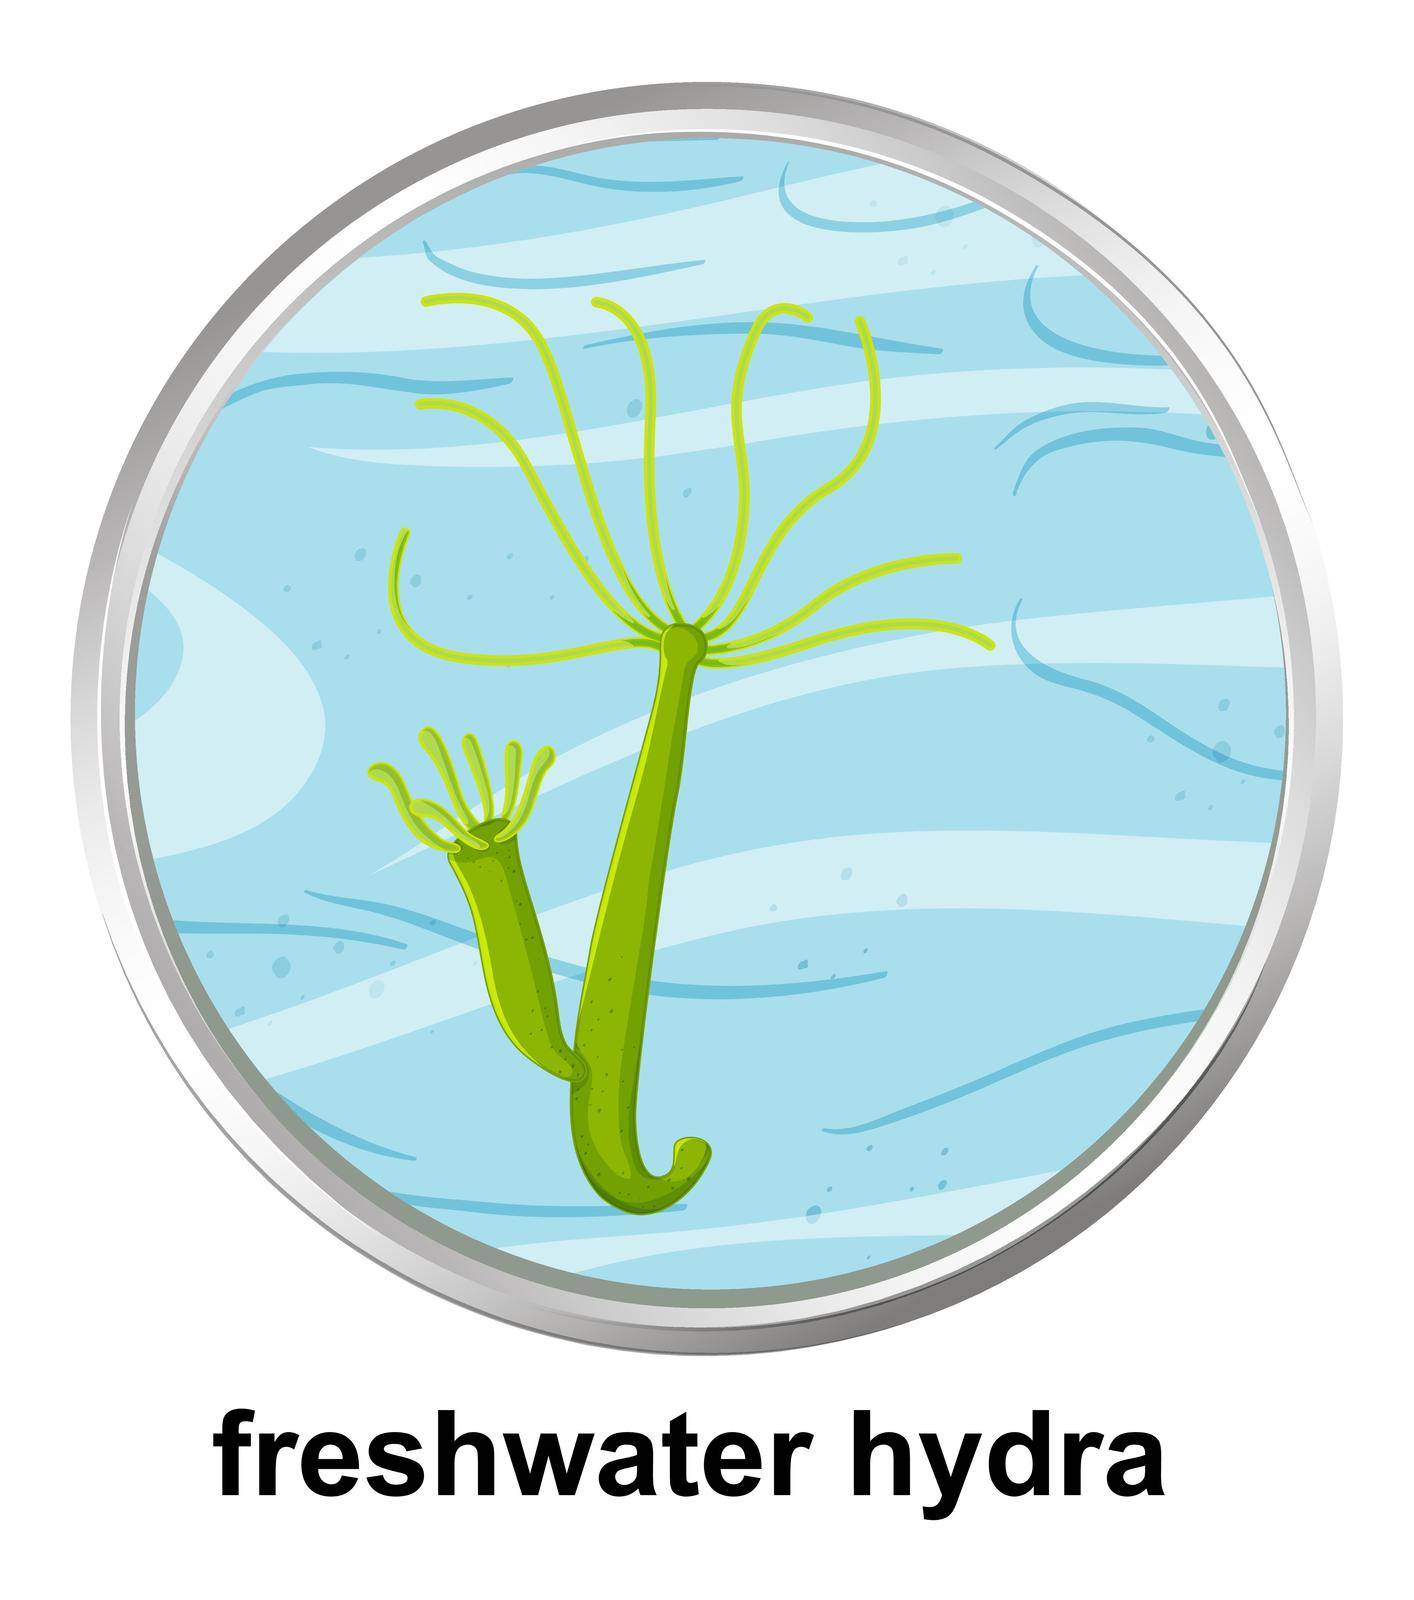 Anatomy structure of Freshwater Hydra on white background by iimages